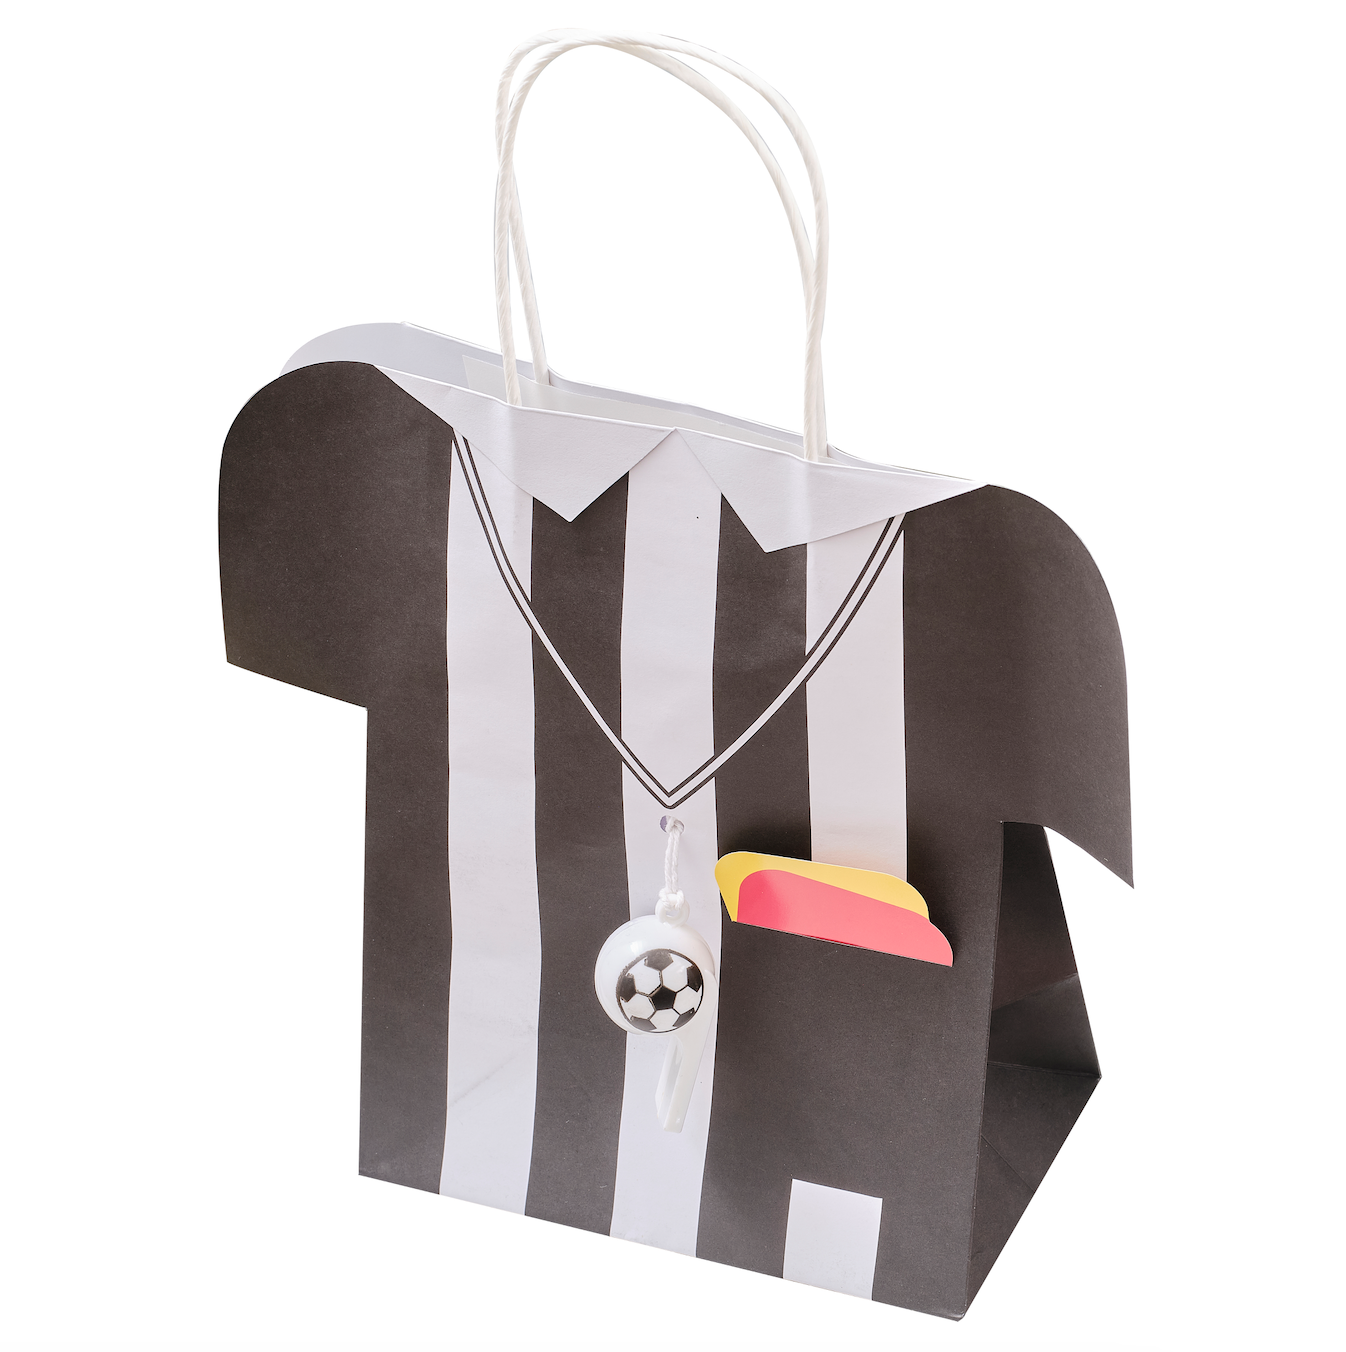 Referee Shirt Football Party Bags with Whistles and Card Tags